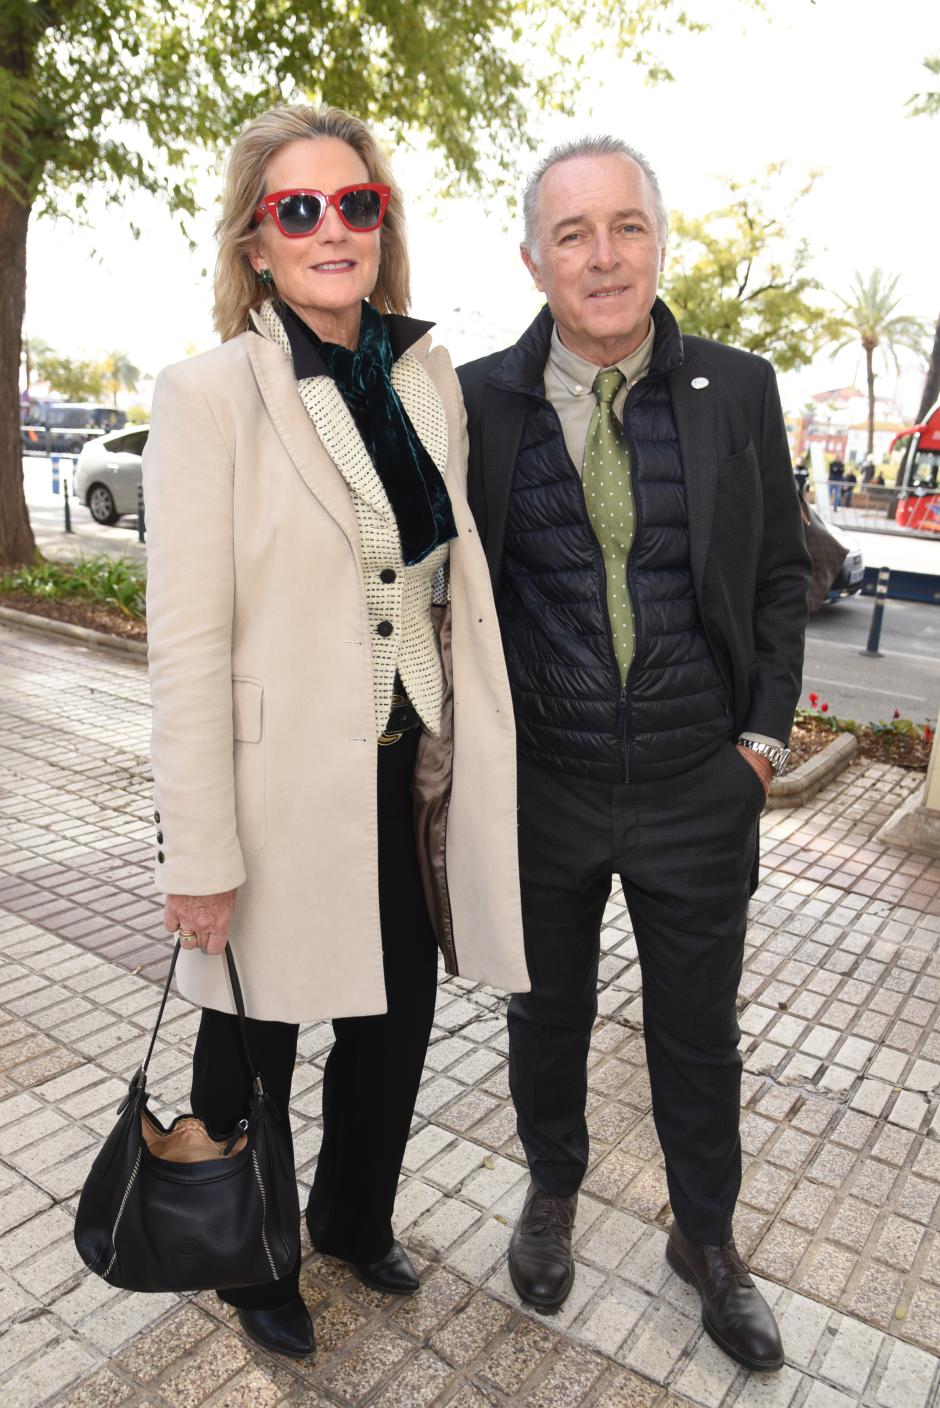 Singer Jose Manuel Soto and Pilar Parejo during the gala of the delivery of the medals of Andalucia in Sevilla on Tuesday, 28 February 2023.